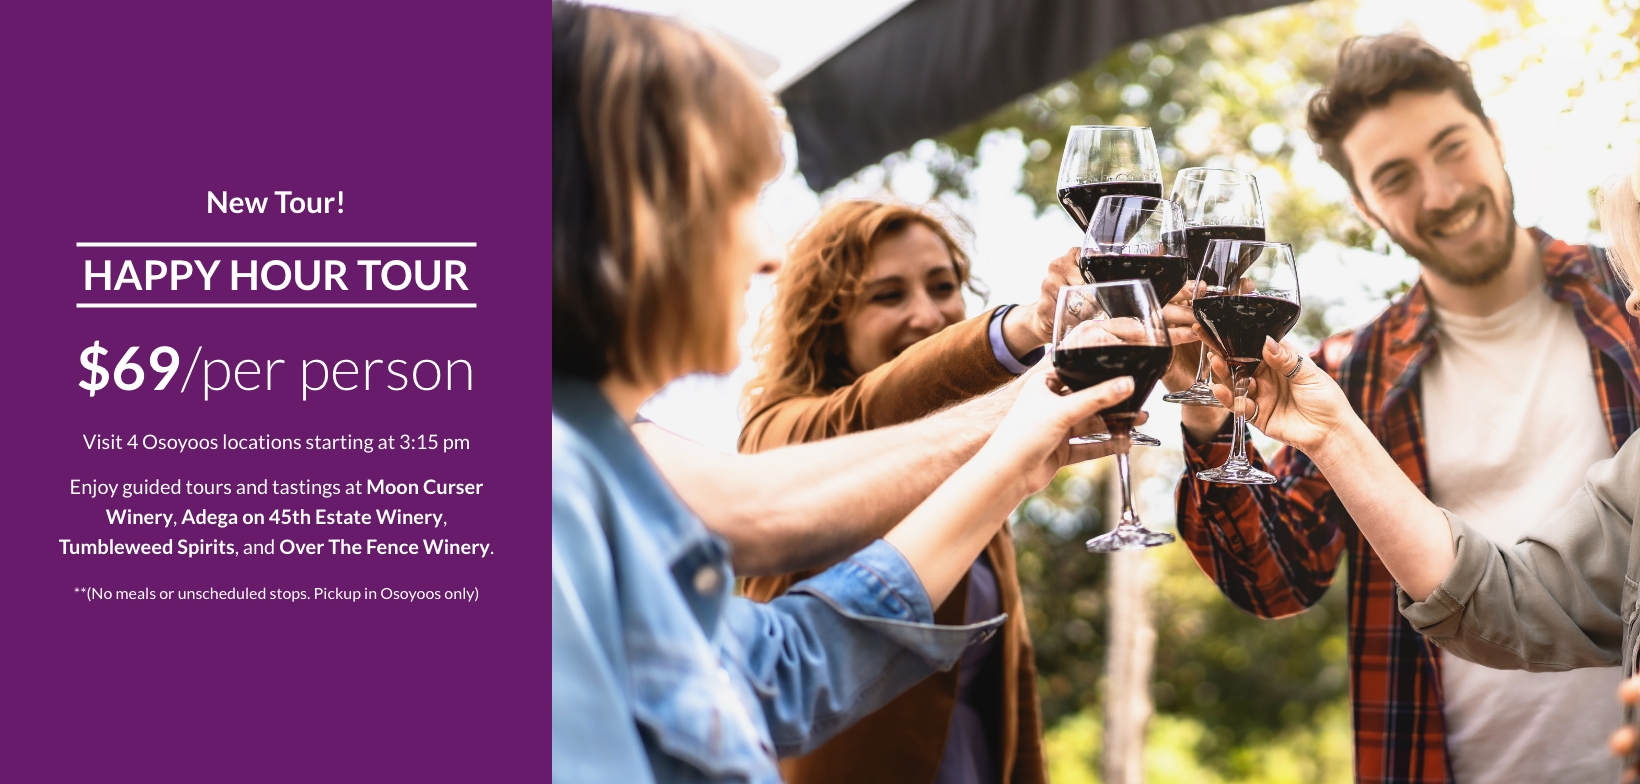 Promotional banner for the New Happy Hour Tour offered by Wine Tours Gone South